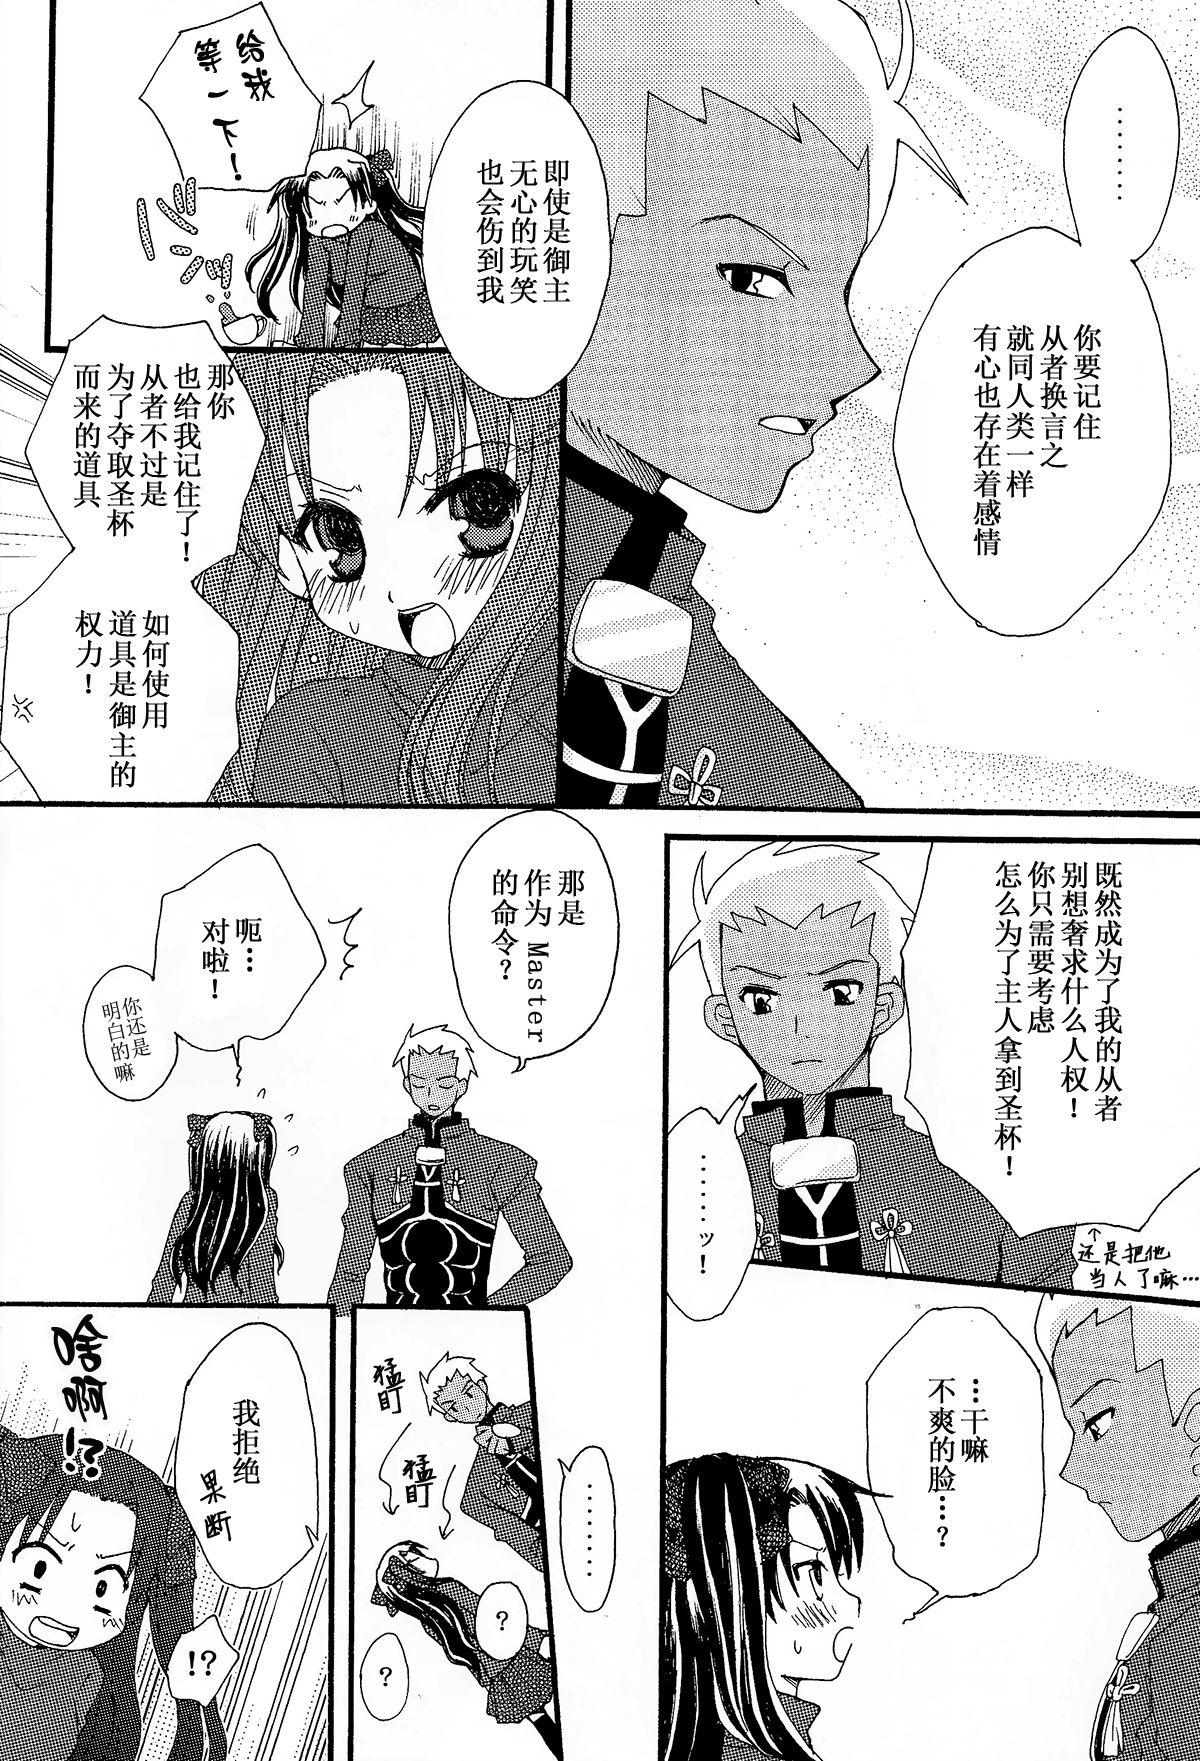 Nut Kanojo to Aiken - Fate stay night Best - Page 5